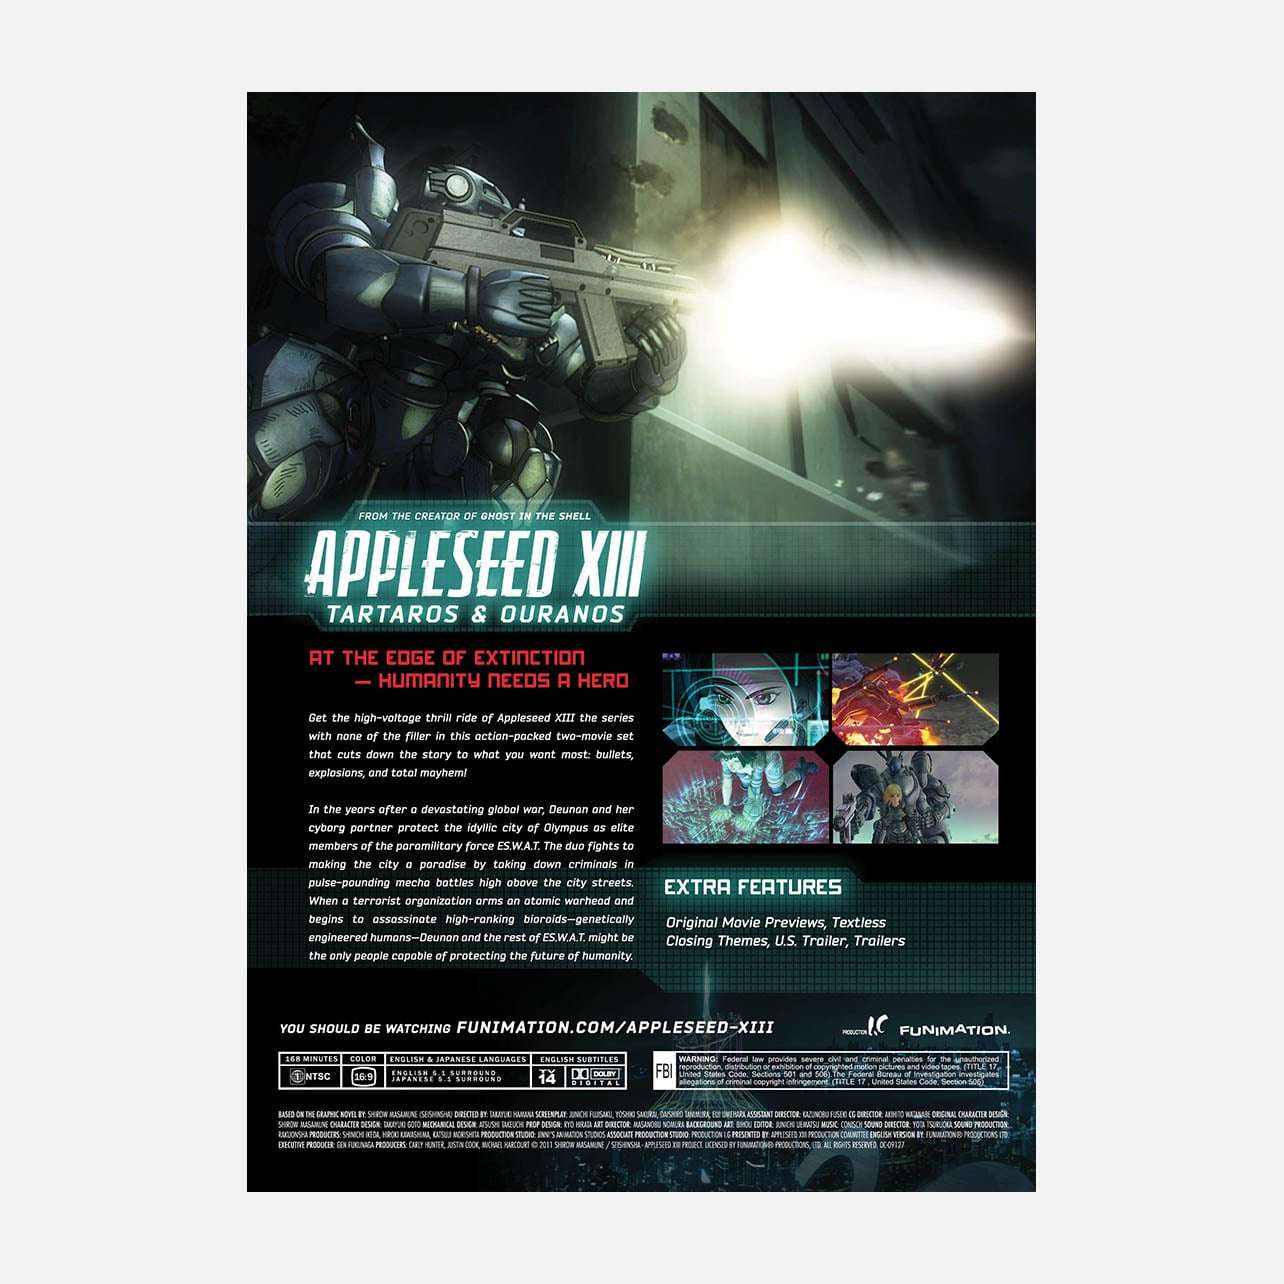 appleseed xiii movie 2 ouranos